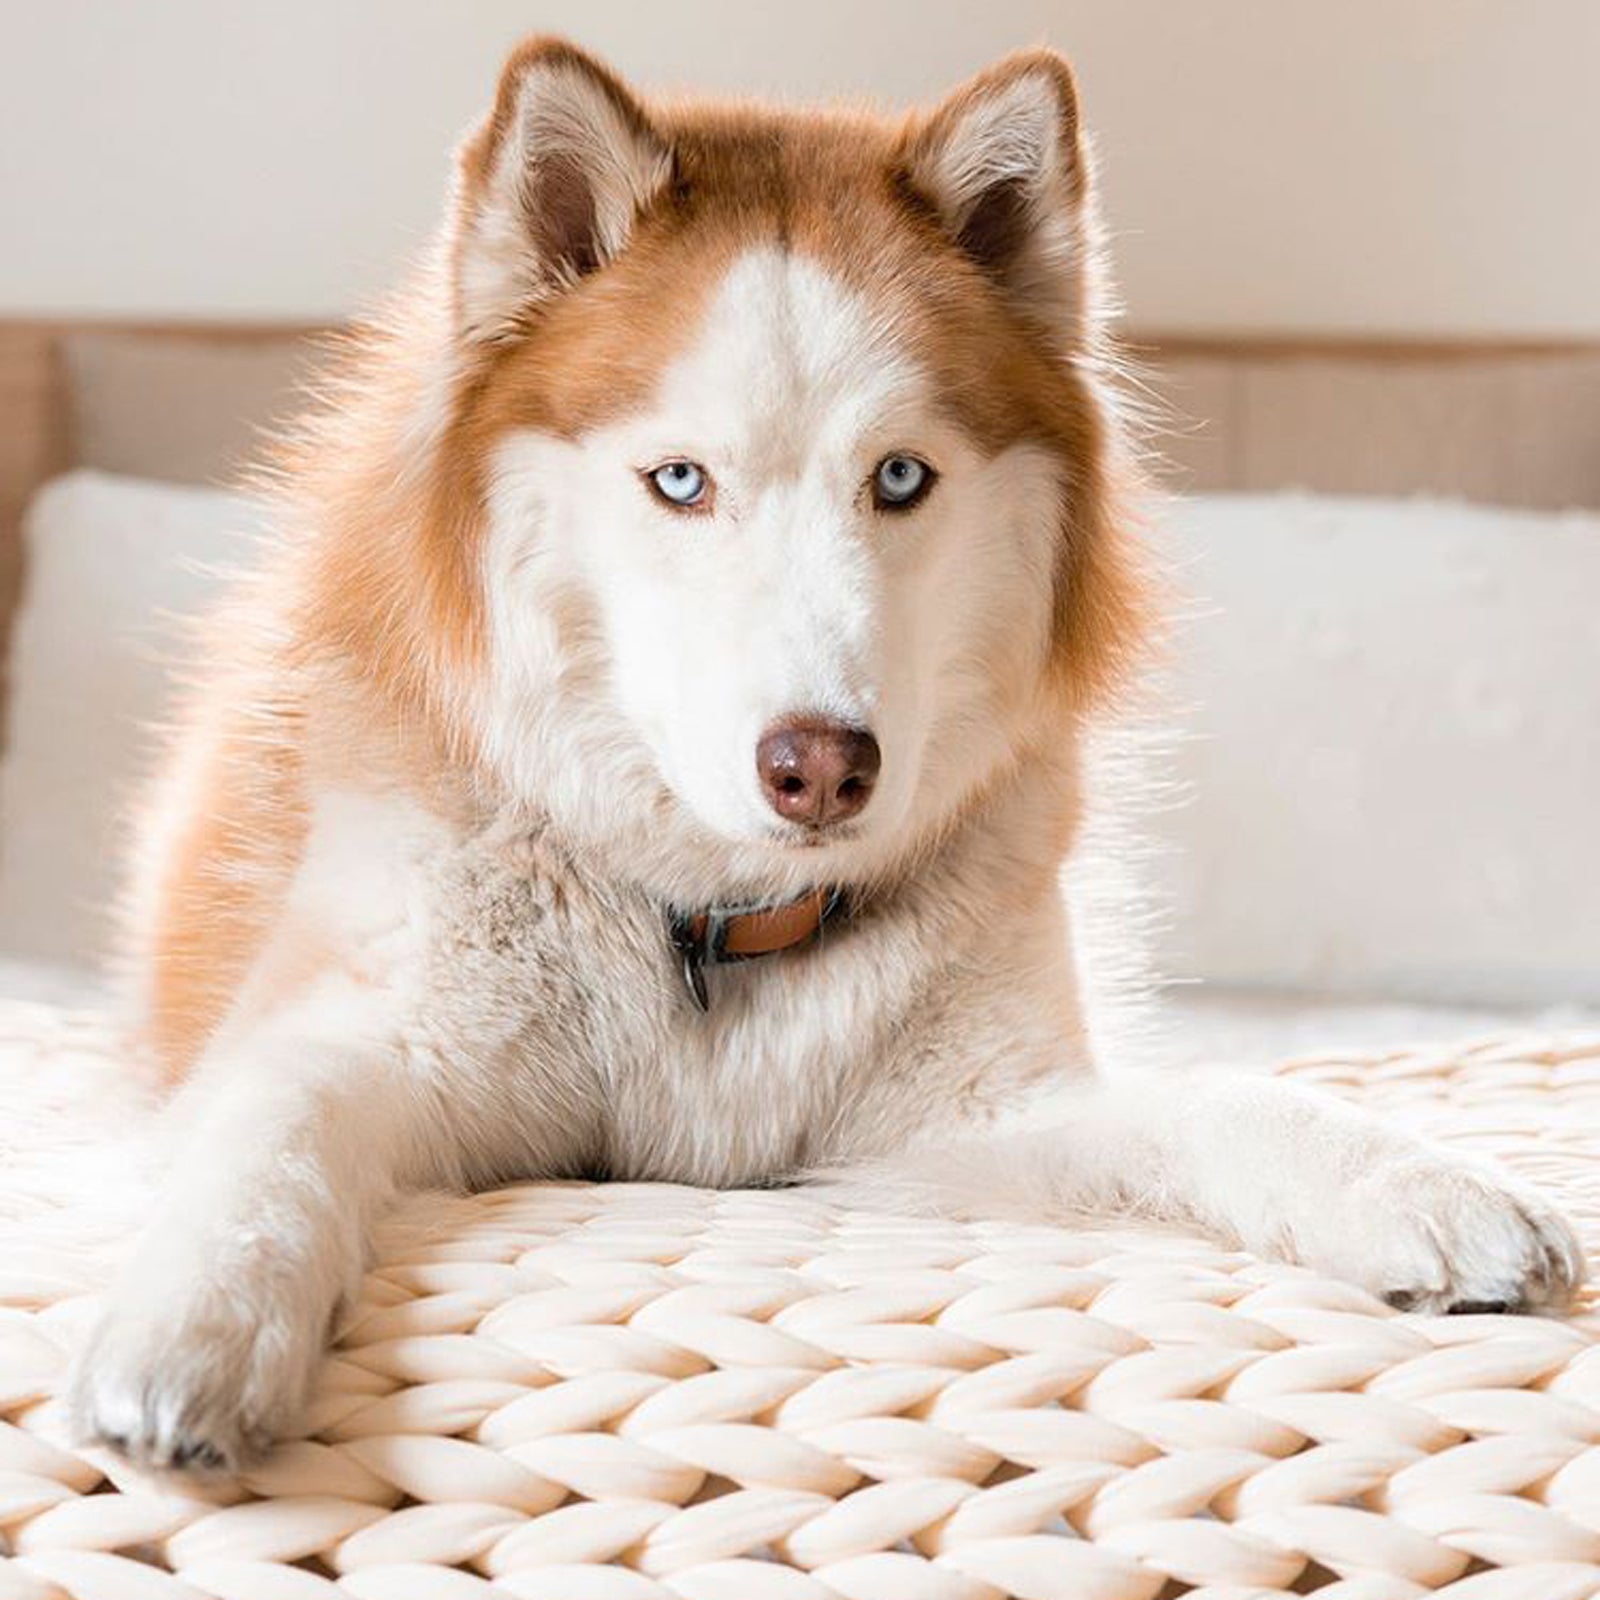 Do Dogs Dream? Exploring The Sleep Science Of Canines.